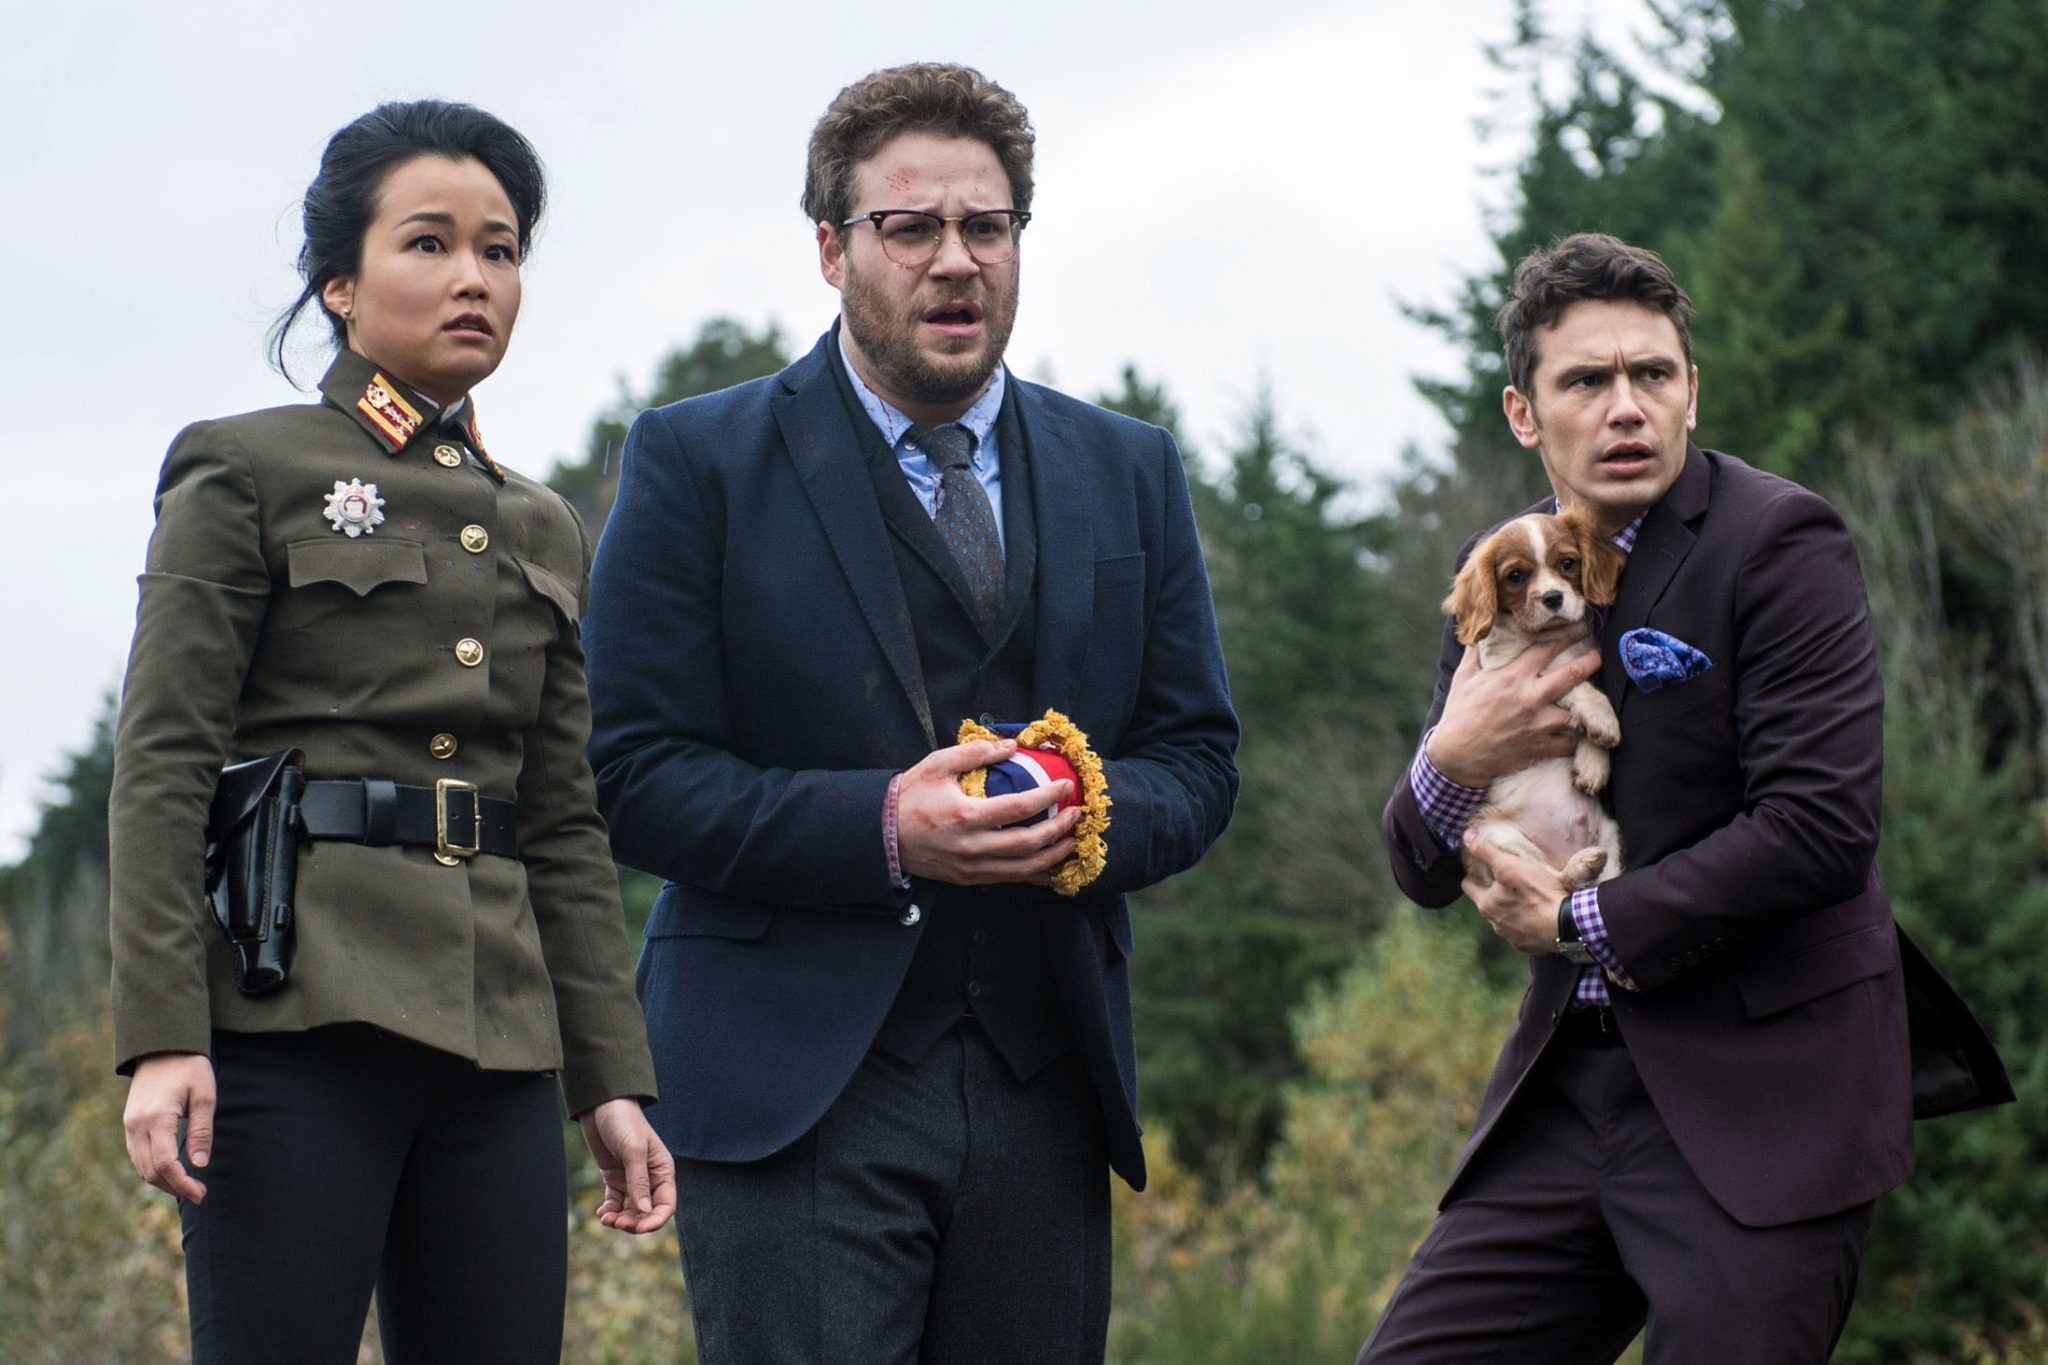 This photo provided by Columbia Pictures - Sony shows, from left, Diana Bang, as Sook, Seth Rogen, as Aaron, and James Franco, as Dave, in Columbia Pictures' "The Interview." (AP Photo/Columbia Pictures - Sony, Ed Araquel)